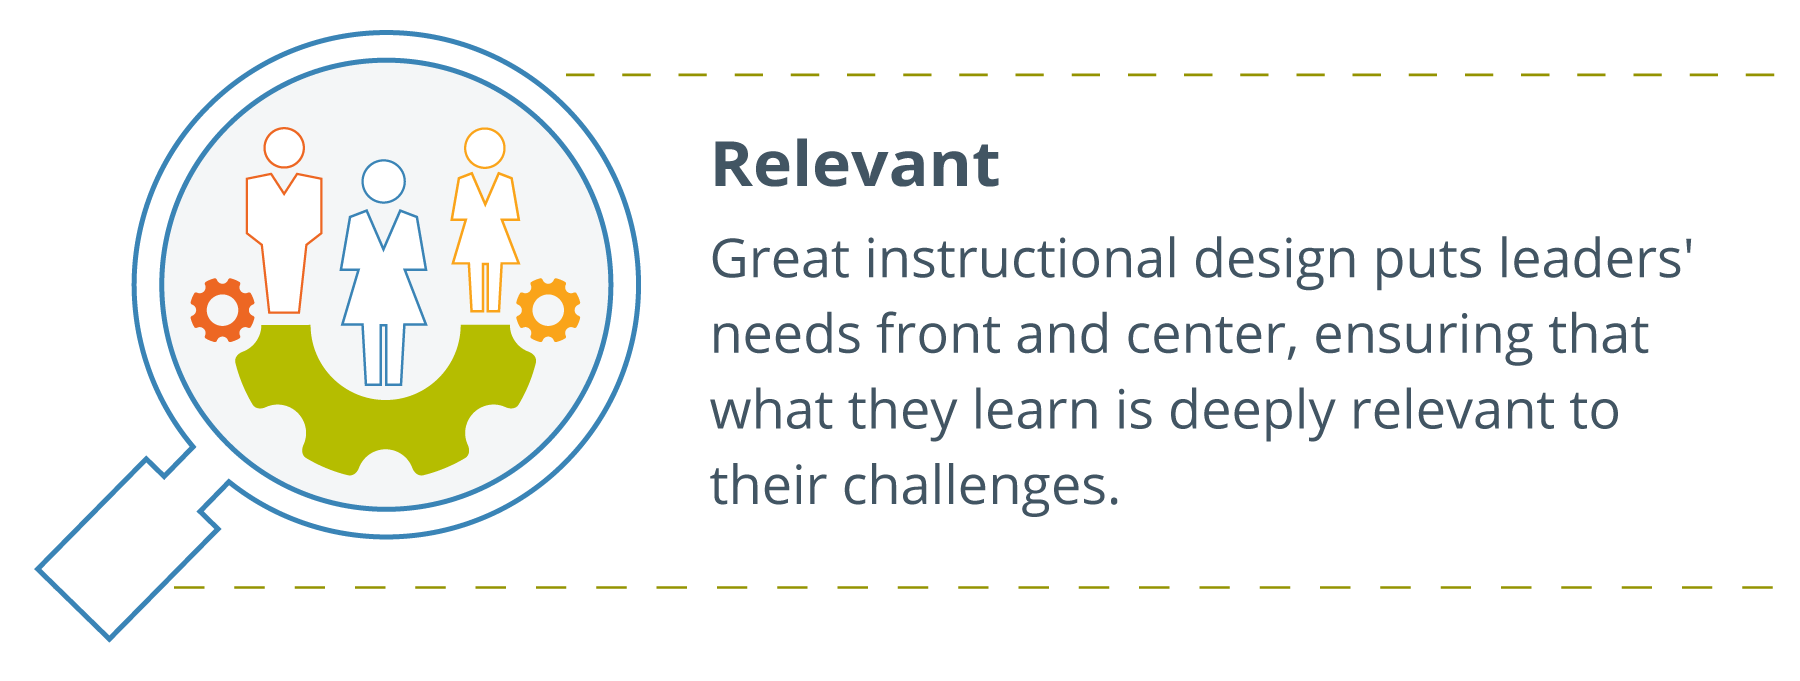 a magnifying glass with gears filling the bottom and people icons up top, one person icon standing in front of the other two, written to the right: Relevant: Great instructional design puts leaders’ needs front and center, ensuring that what they learn is deeply relevant to their challenges.